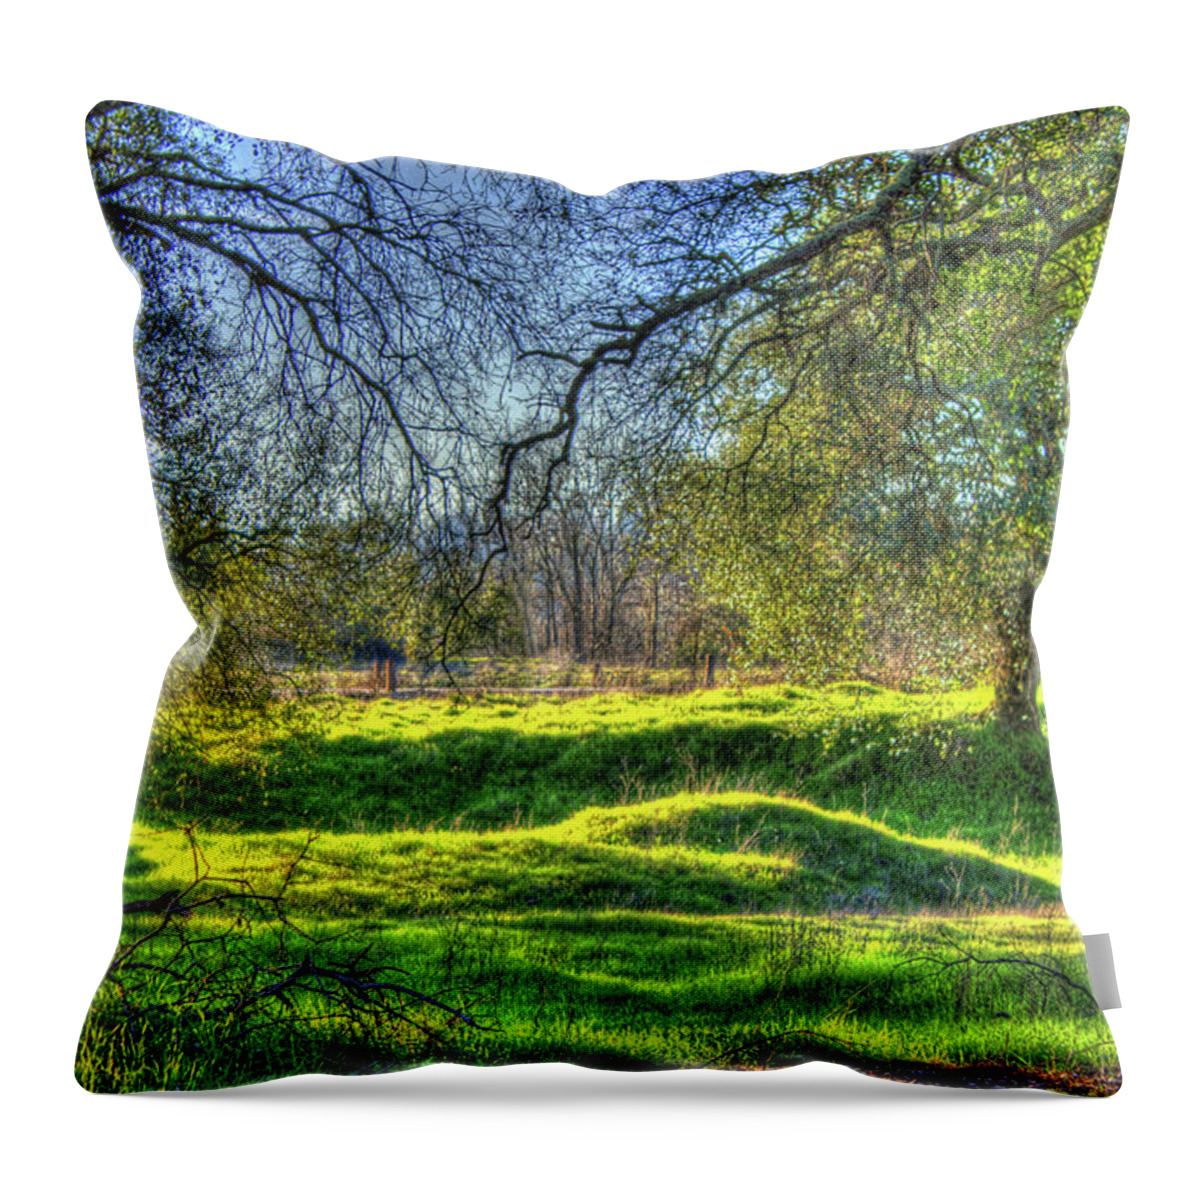 Hdr Throw Pillow featuring the photograph Tree Lined Meadow by Randy Wehner